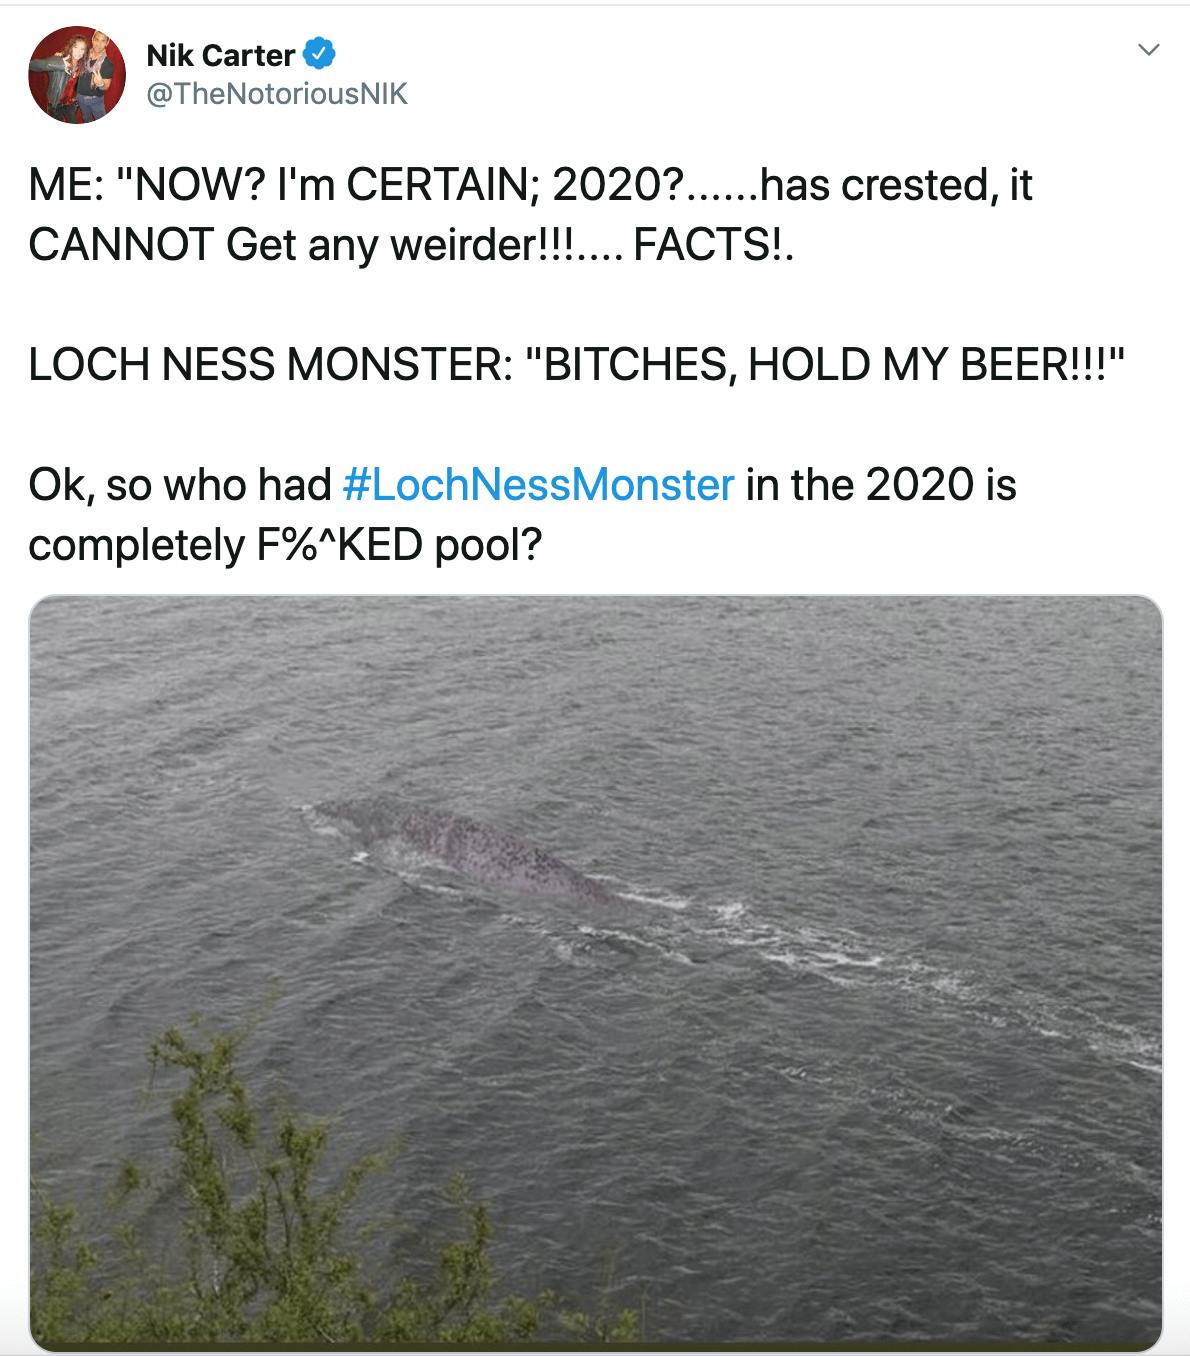 ME: "NOW? I'm CERTAIN; 2020?......has crested, it CANNOT Get any weirder!!!.... FACTS!.  LOCH NESS MONSTER: "BITCHES, HOLD MY BEER!!!"  Ok, so who had #LochNessMonster in the 2020 is completely F%^KED pool?